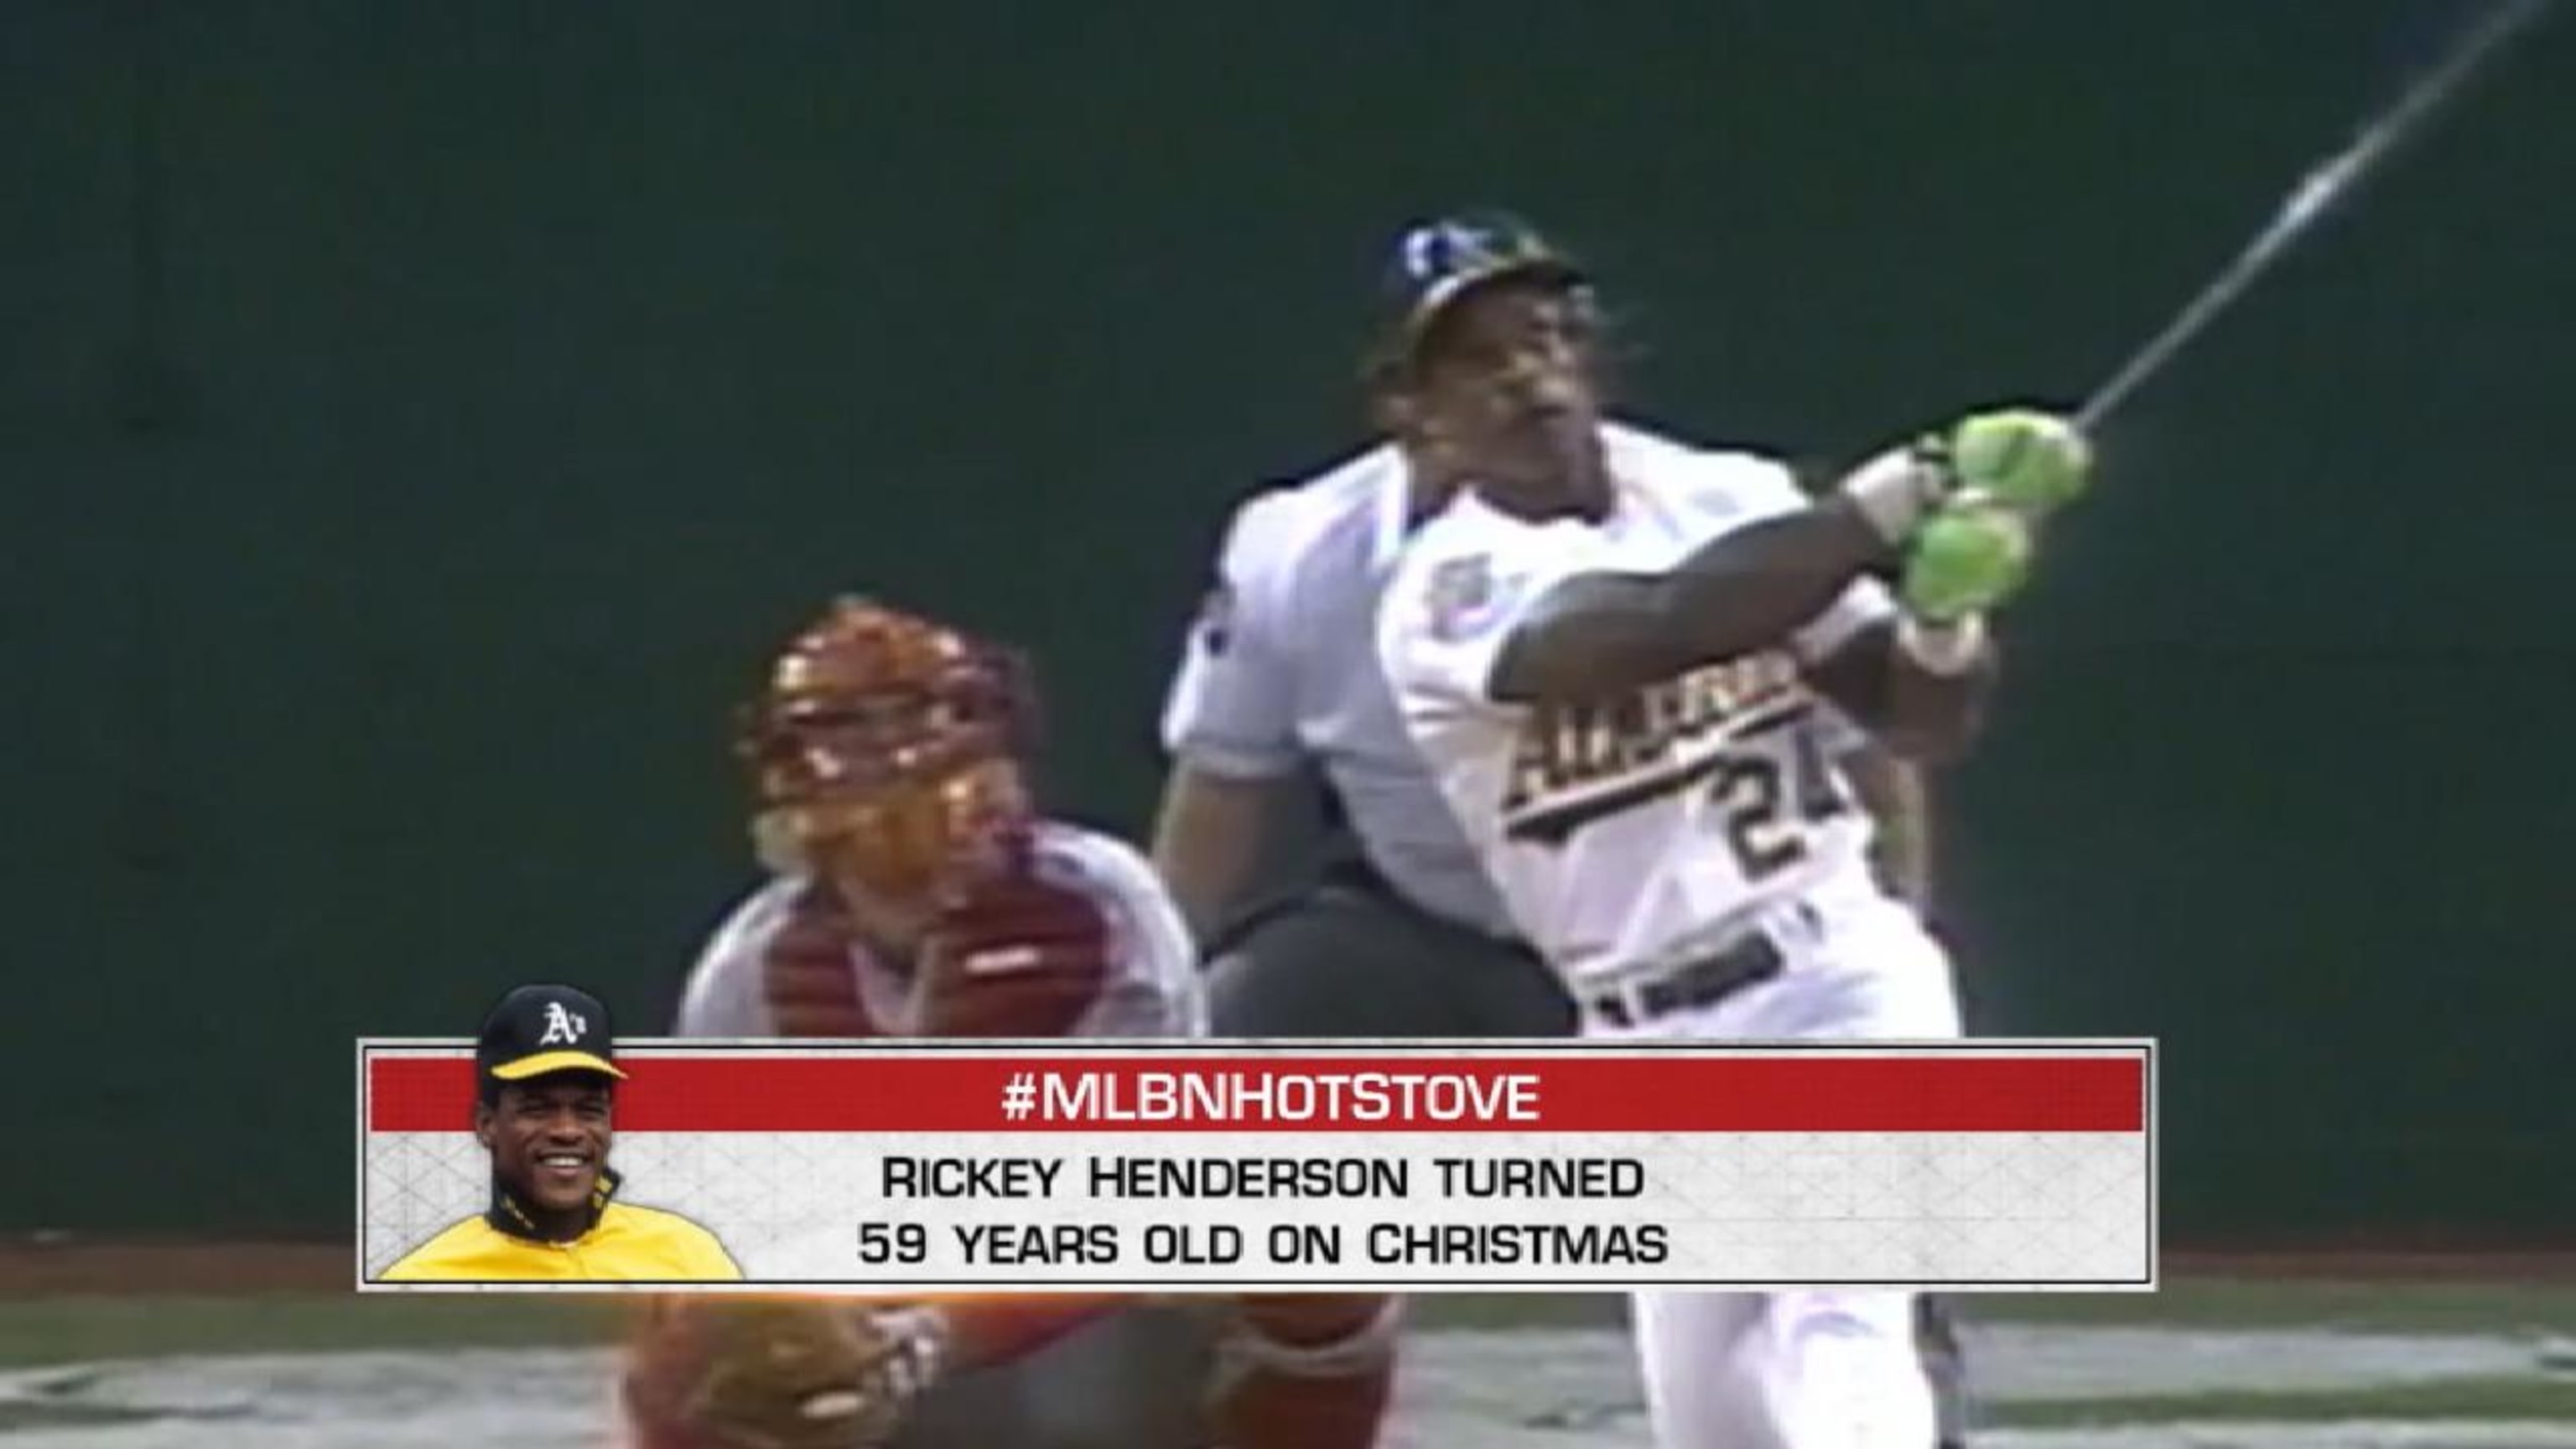 MLB on FOX - On this date in 1979, Rickey Henderson